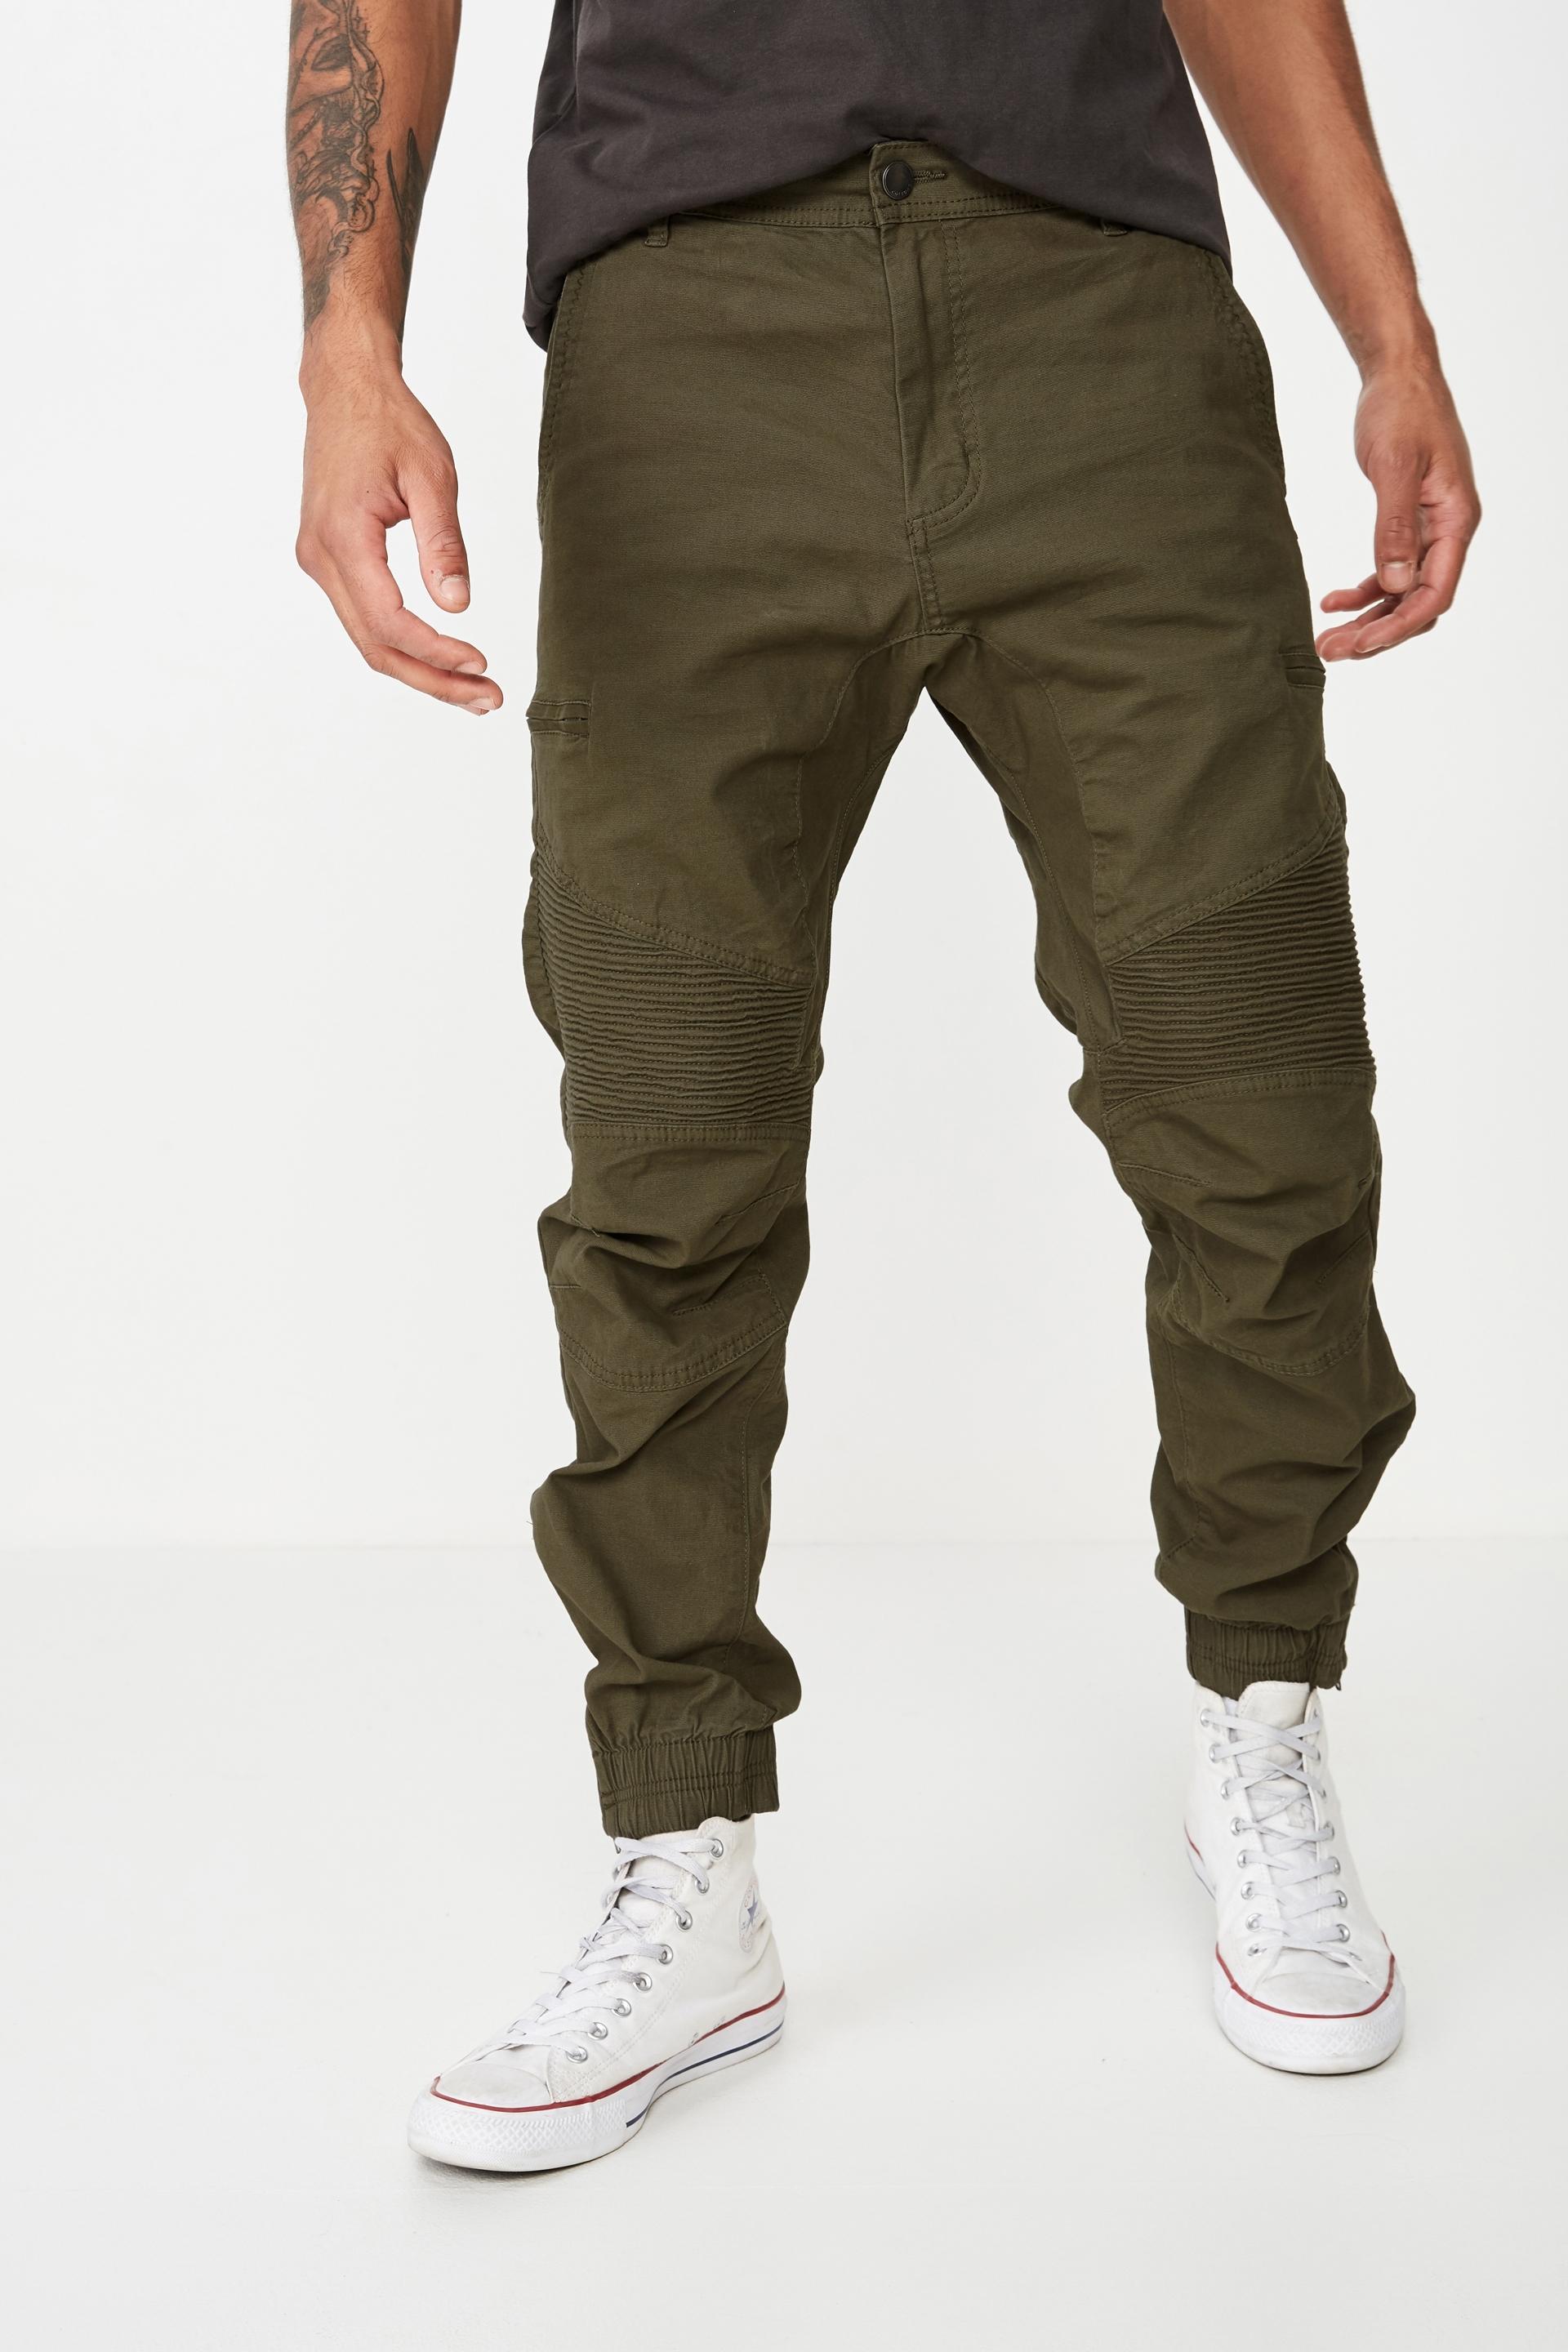 Urban jogger - forrest green Cotton On Pants & Chinos | Superbalist.com